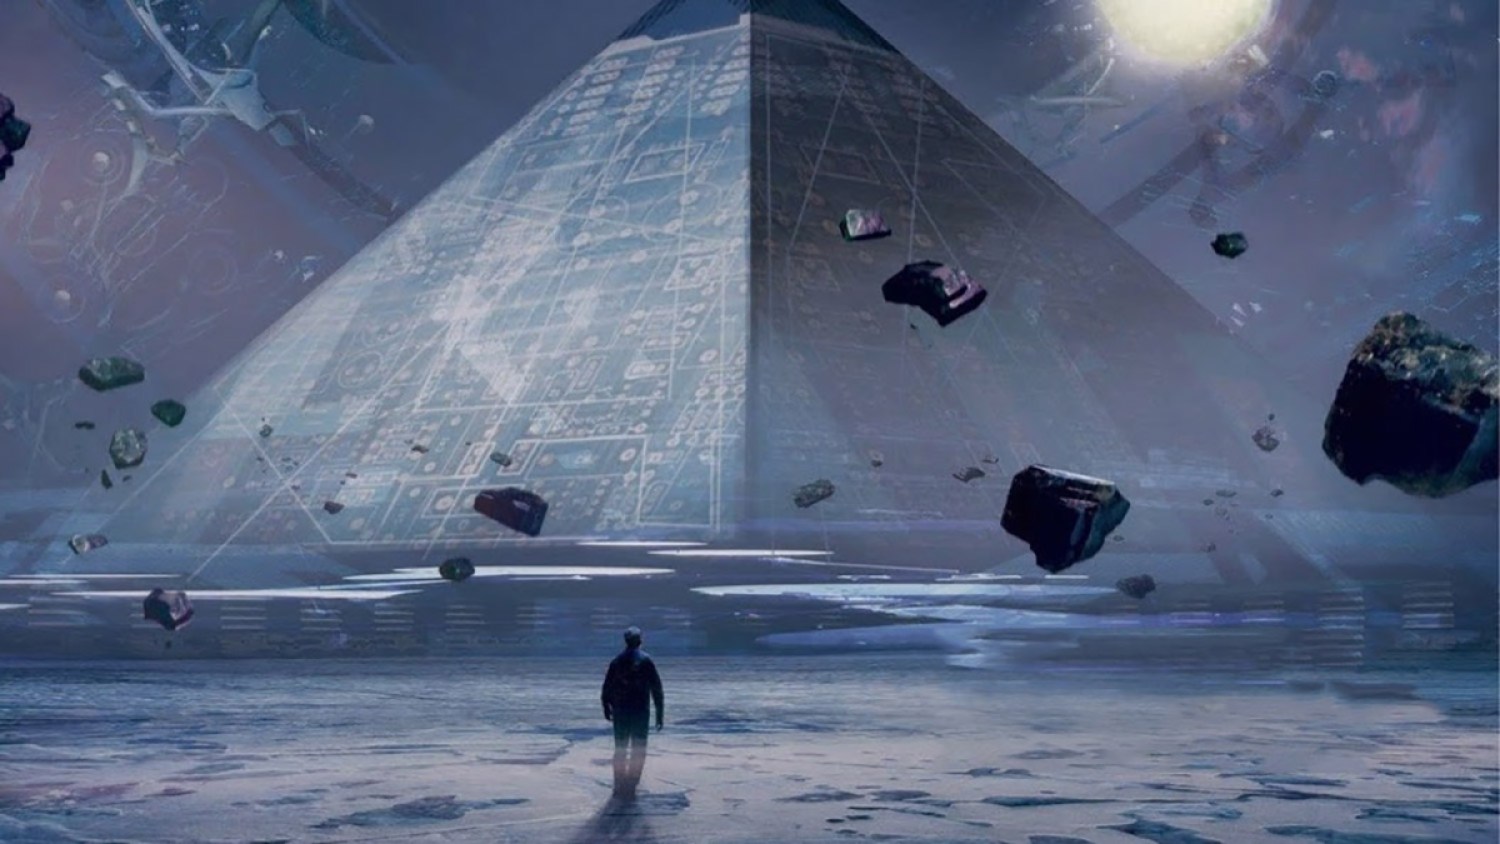 A futuristic pyramid, with asteroids and various space travel objects, with a man standing in the forefront of the image. Cover art for The Three Body Problem 